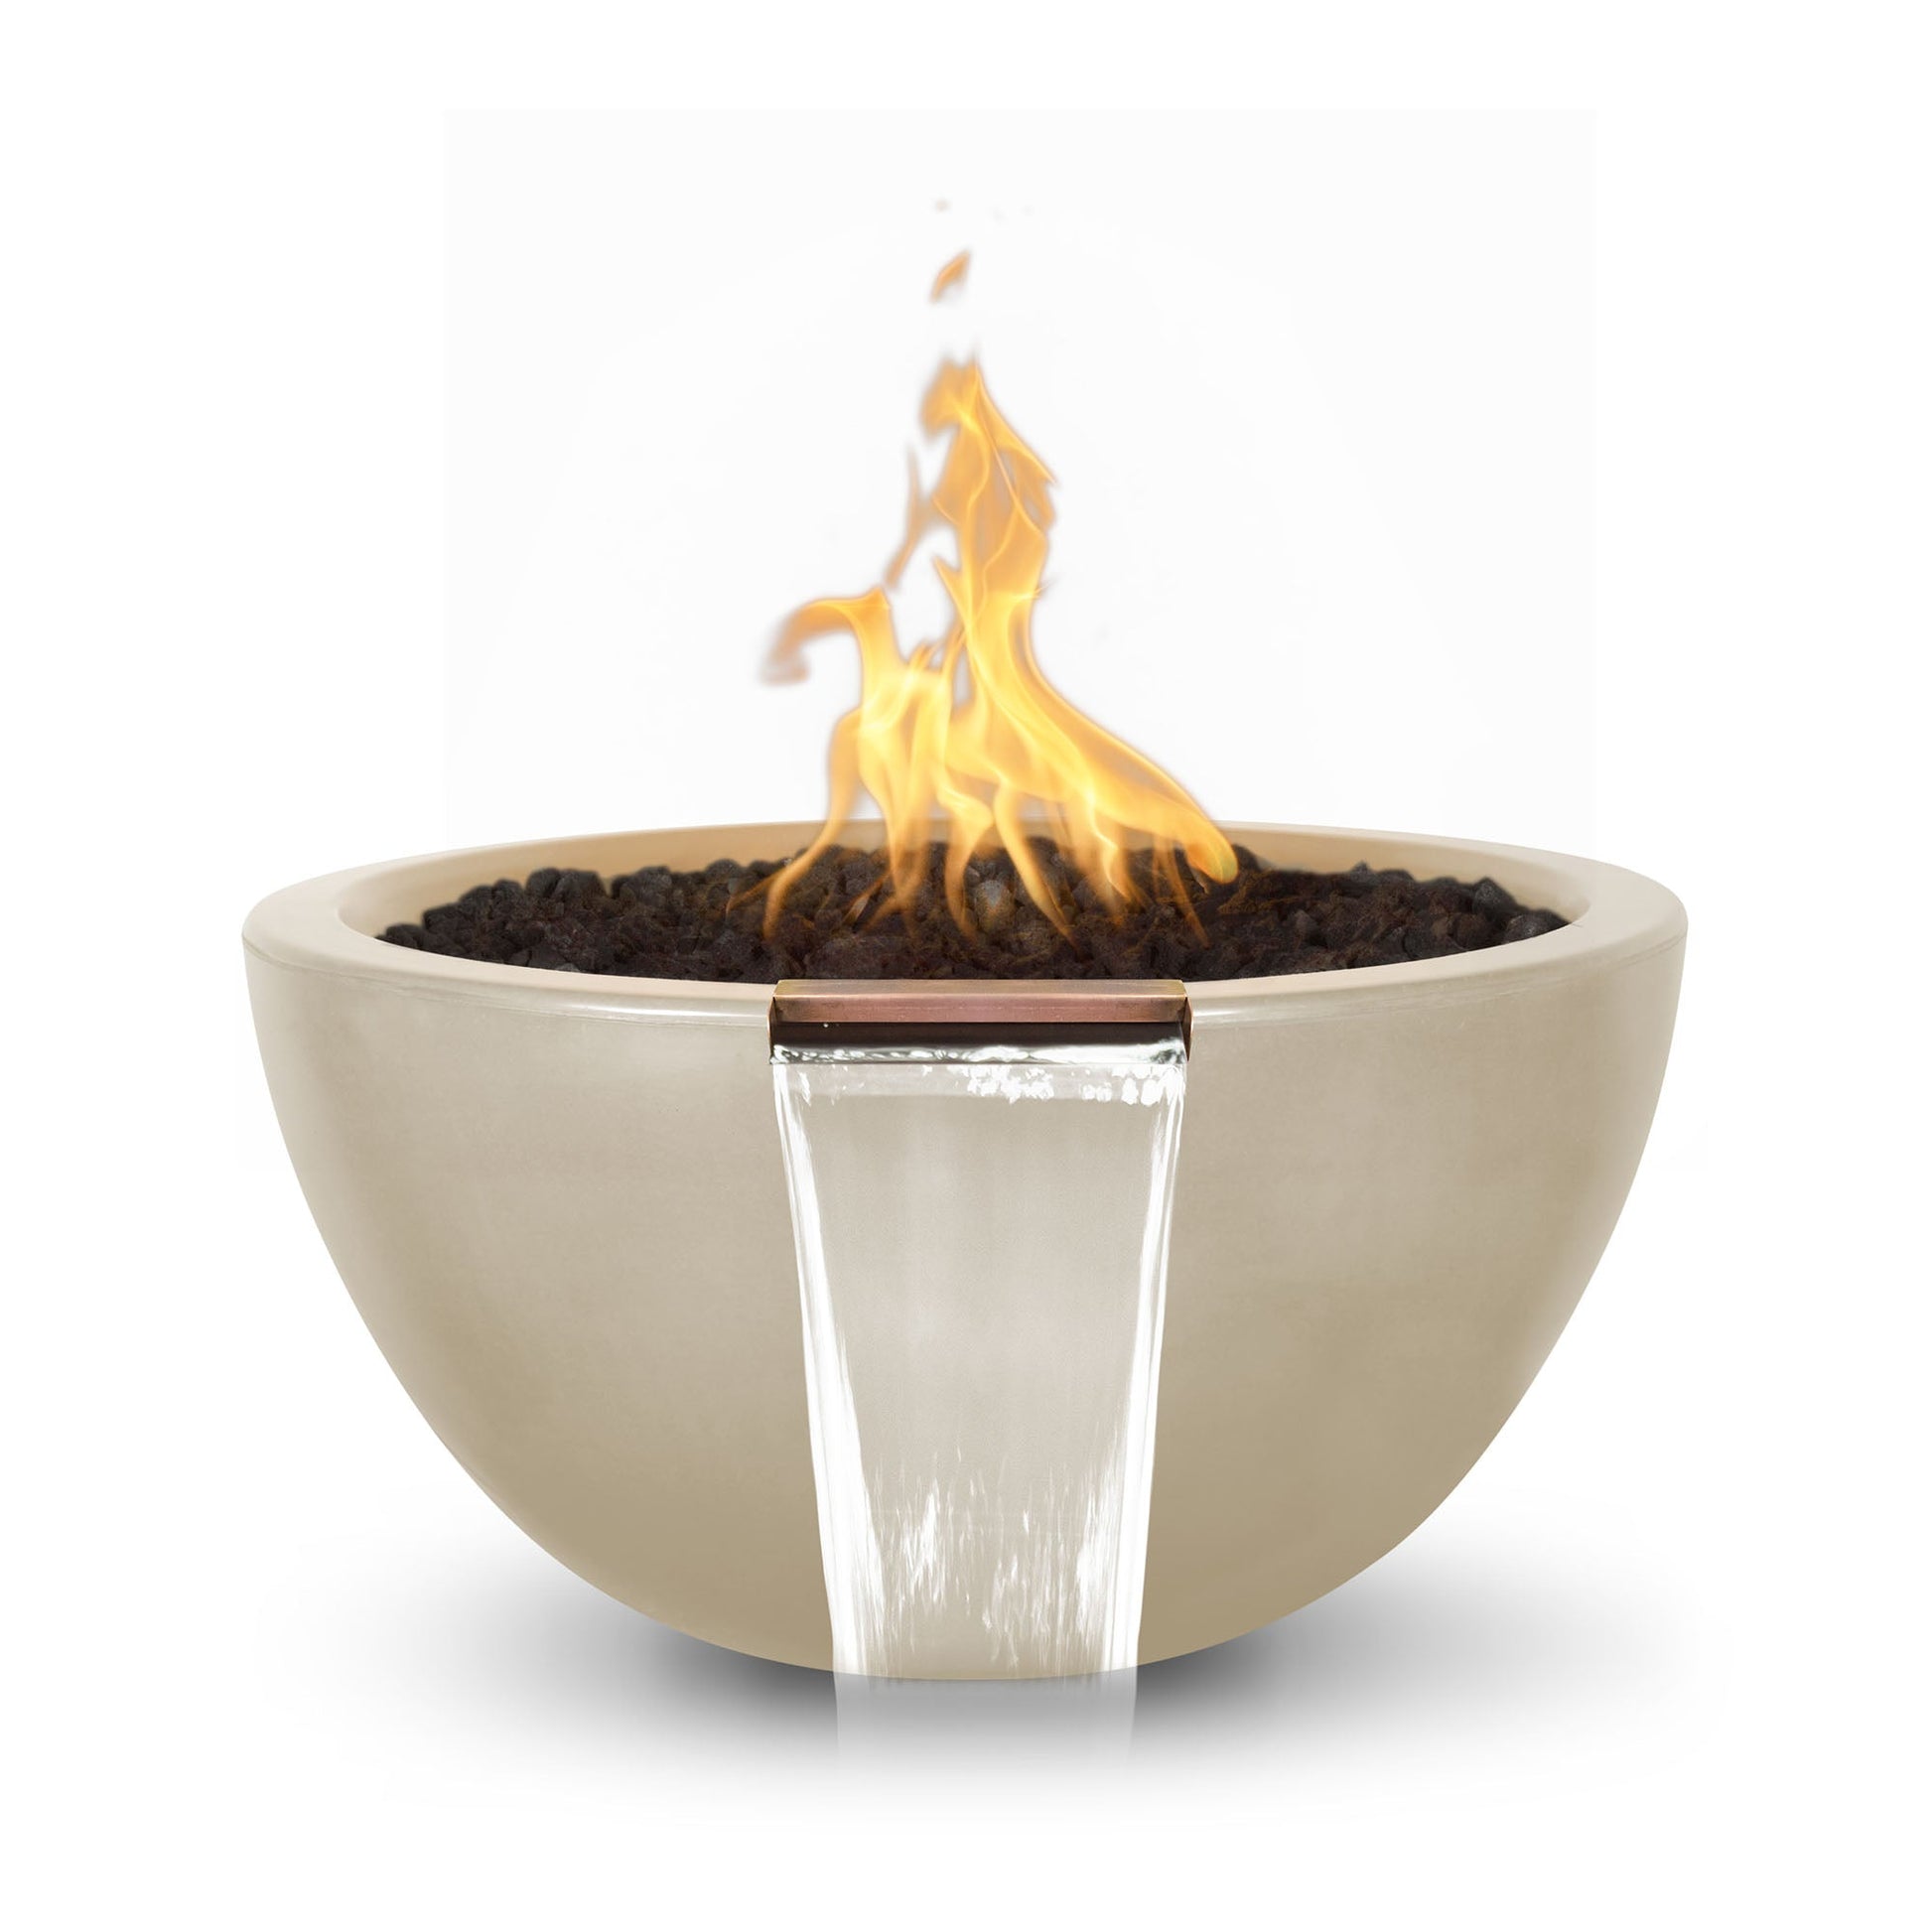 The Outdoor Plus Round Luna 38" Brown GFRC Concrete Liquid Propane Fire & Water Bowl with Match Lit with Flame Sense Ignition